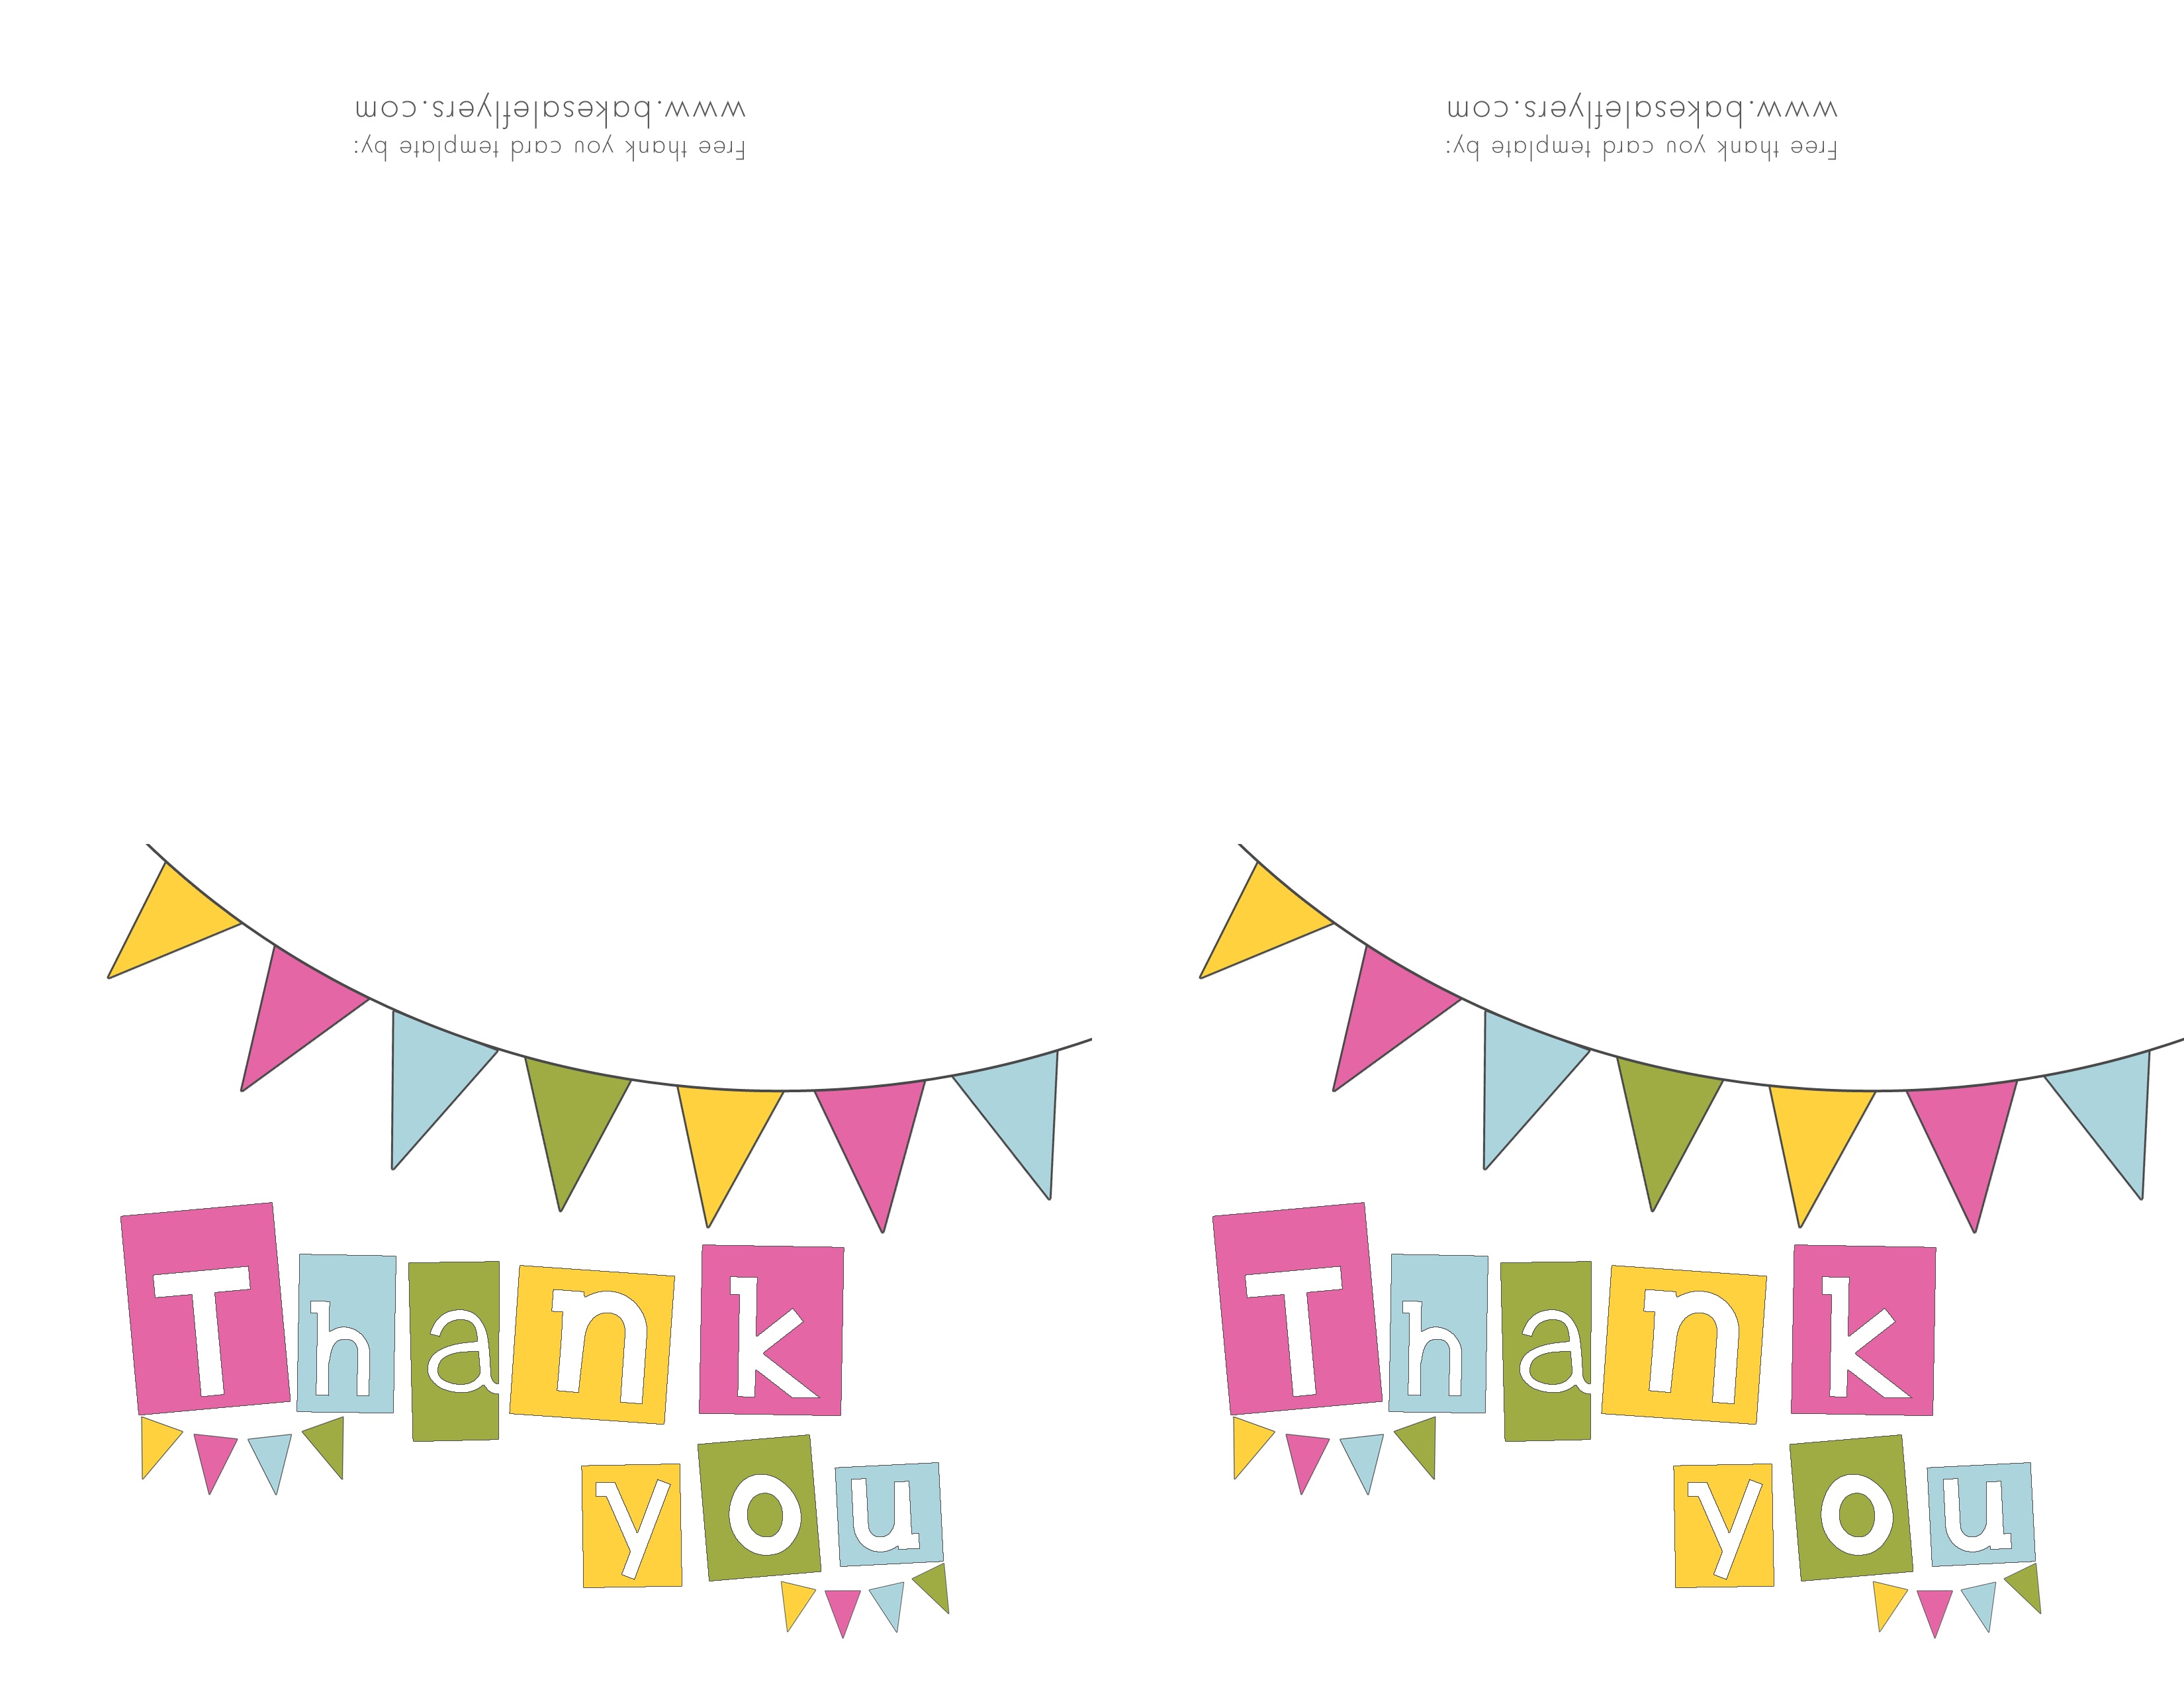 Free Printable Thank You Cards | Bake Sale Flyers – Free Flyer Designs - Thank You Card Free Printable Template